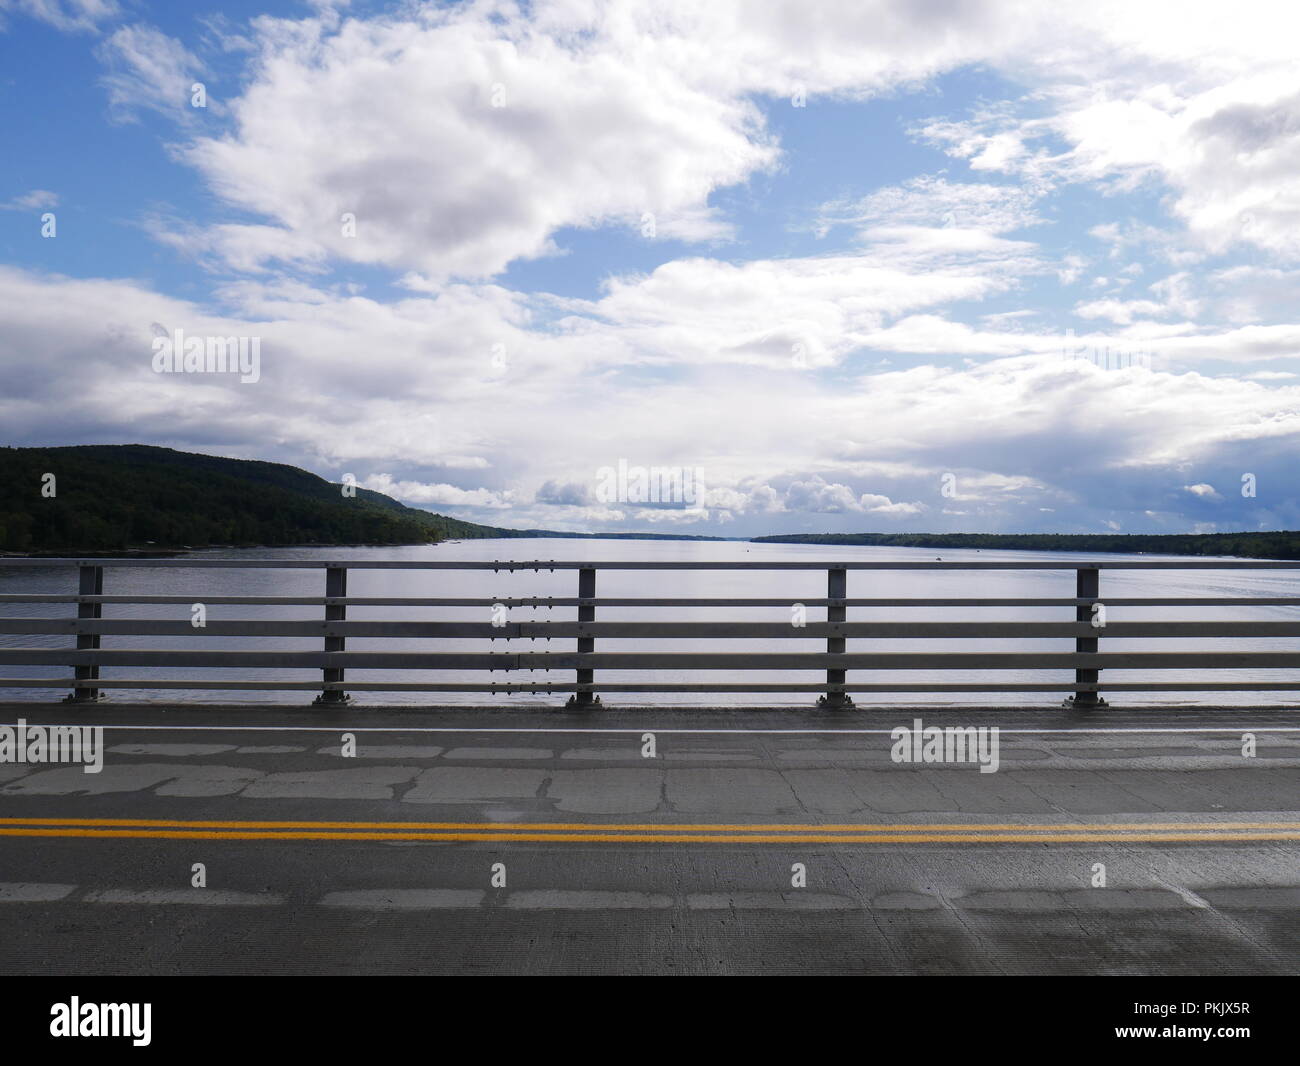 A road crossing a lake in the Adirondacks Stock Photo